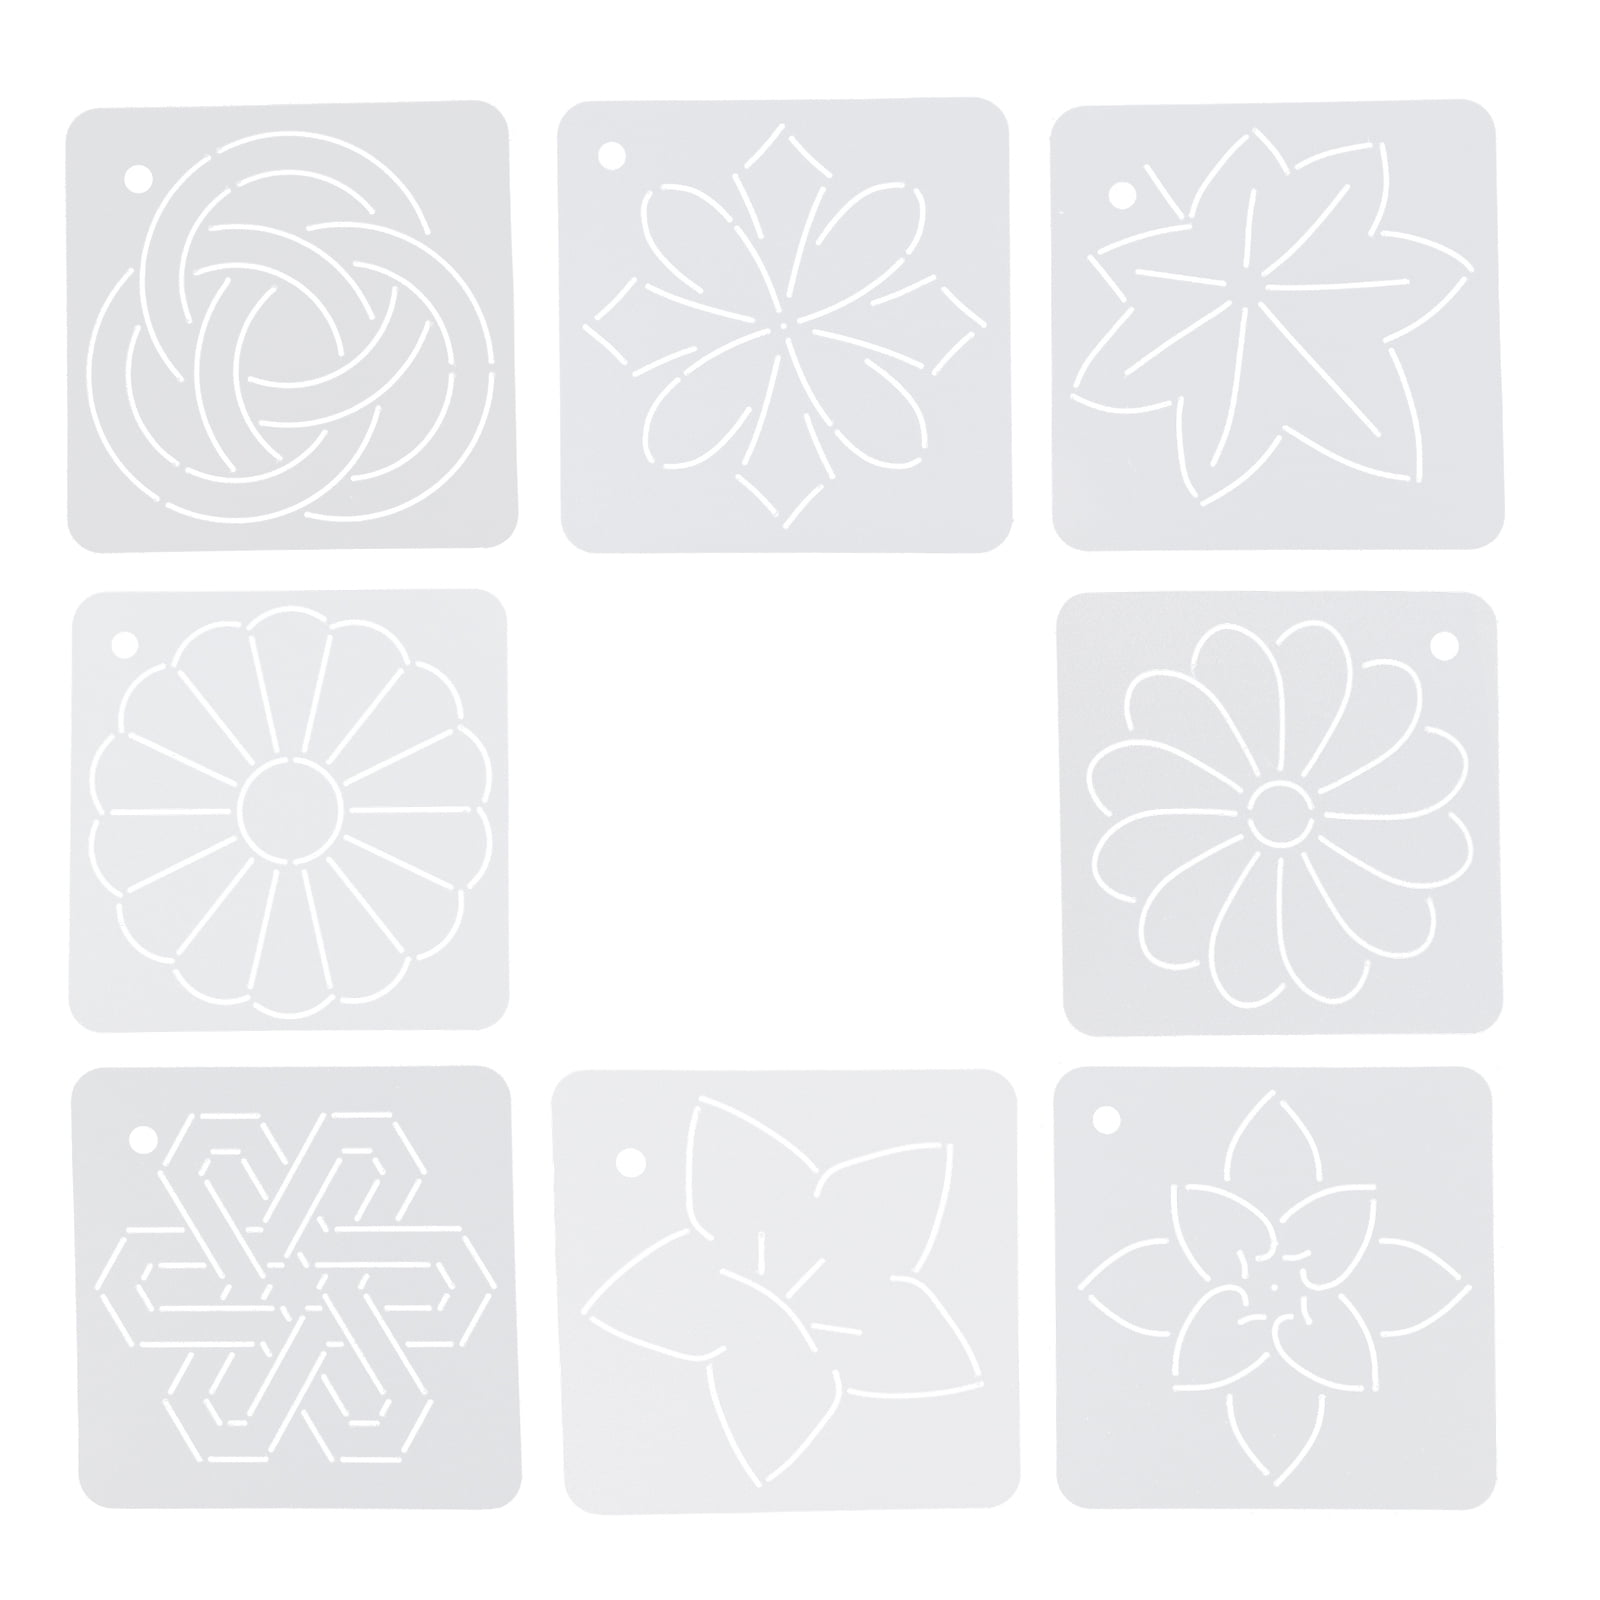 DABLINE 13 Pcs Quilting Template Set Includes 8 Quilting Templates, Quilting Frame, Quilting Gloves, and Quilting stickers. Free Motion Quilting